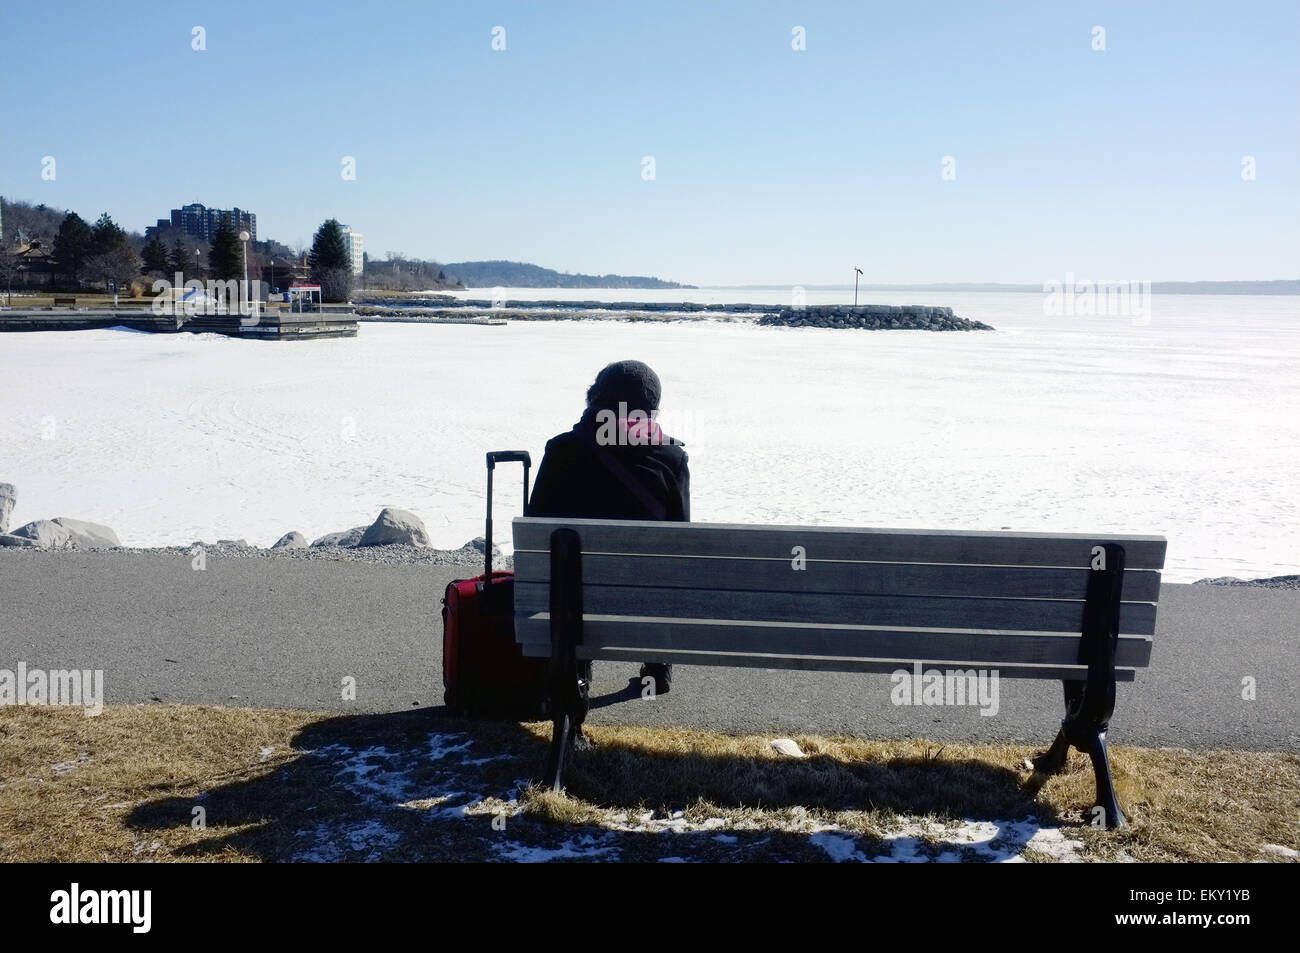 A woman sits on a bench overlooking the frozen lake Simcoe on the edge of Barrie in Canada. Stock Photo